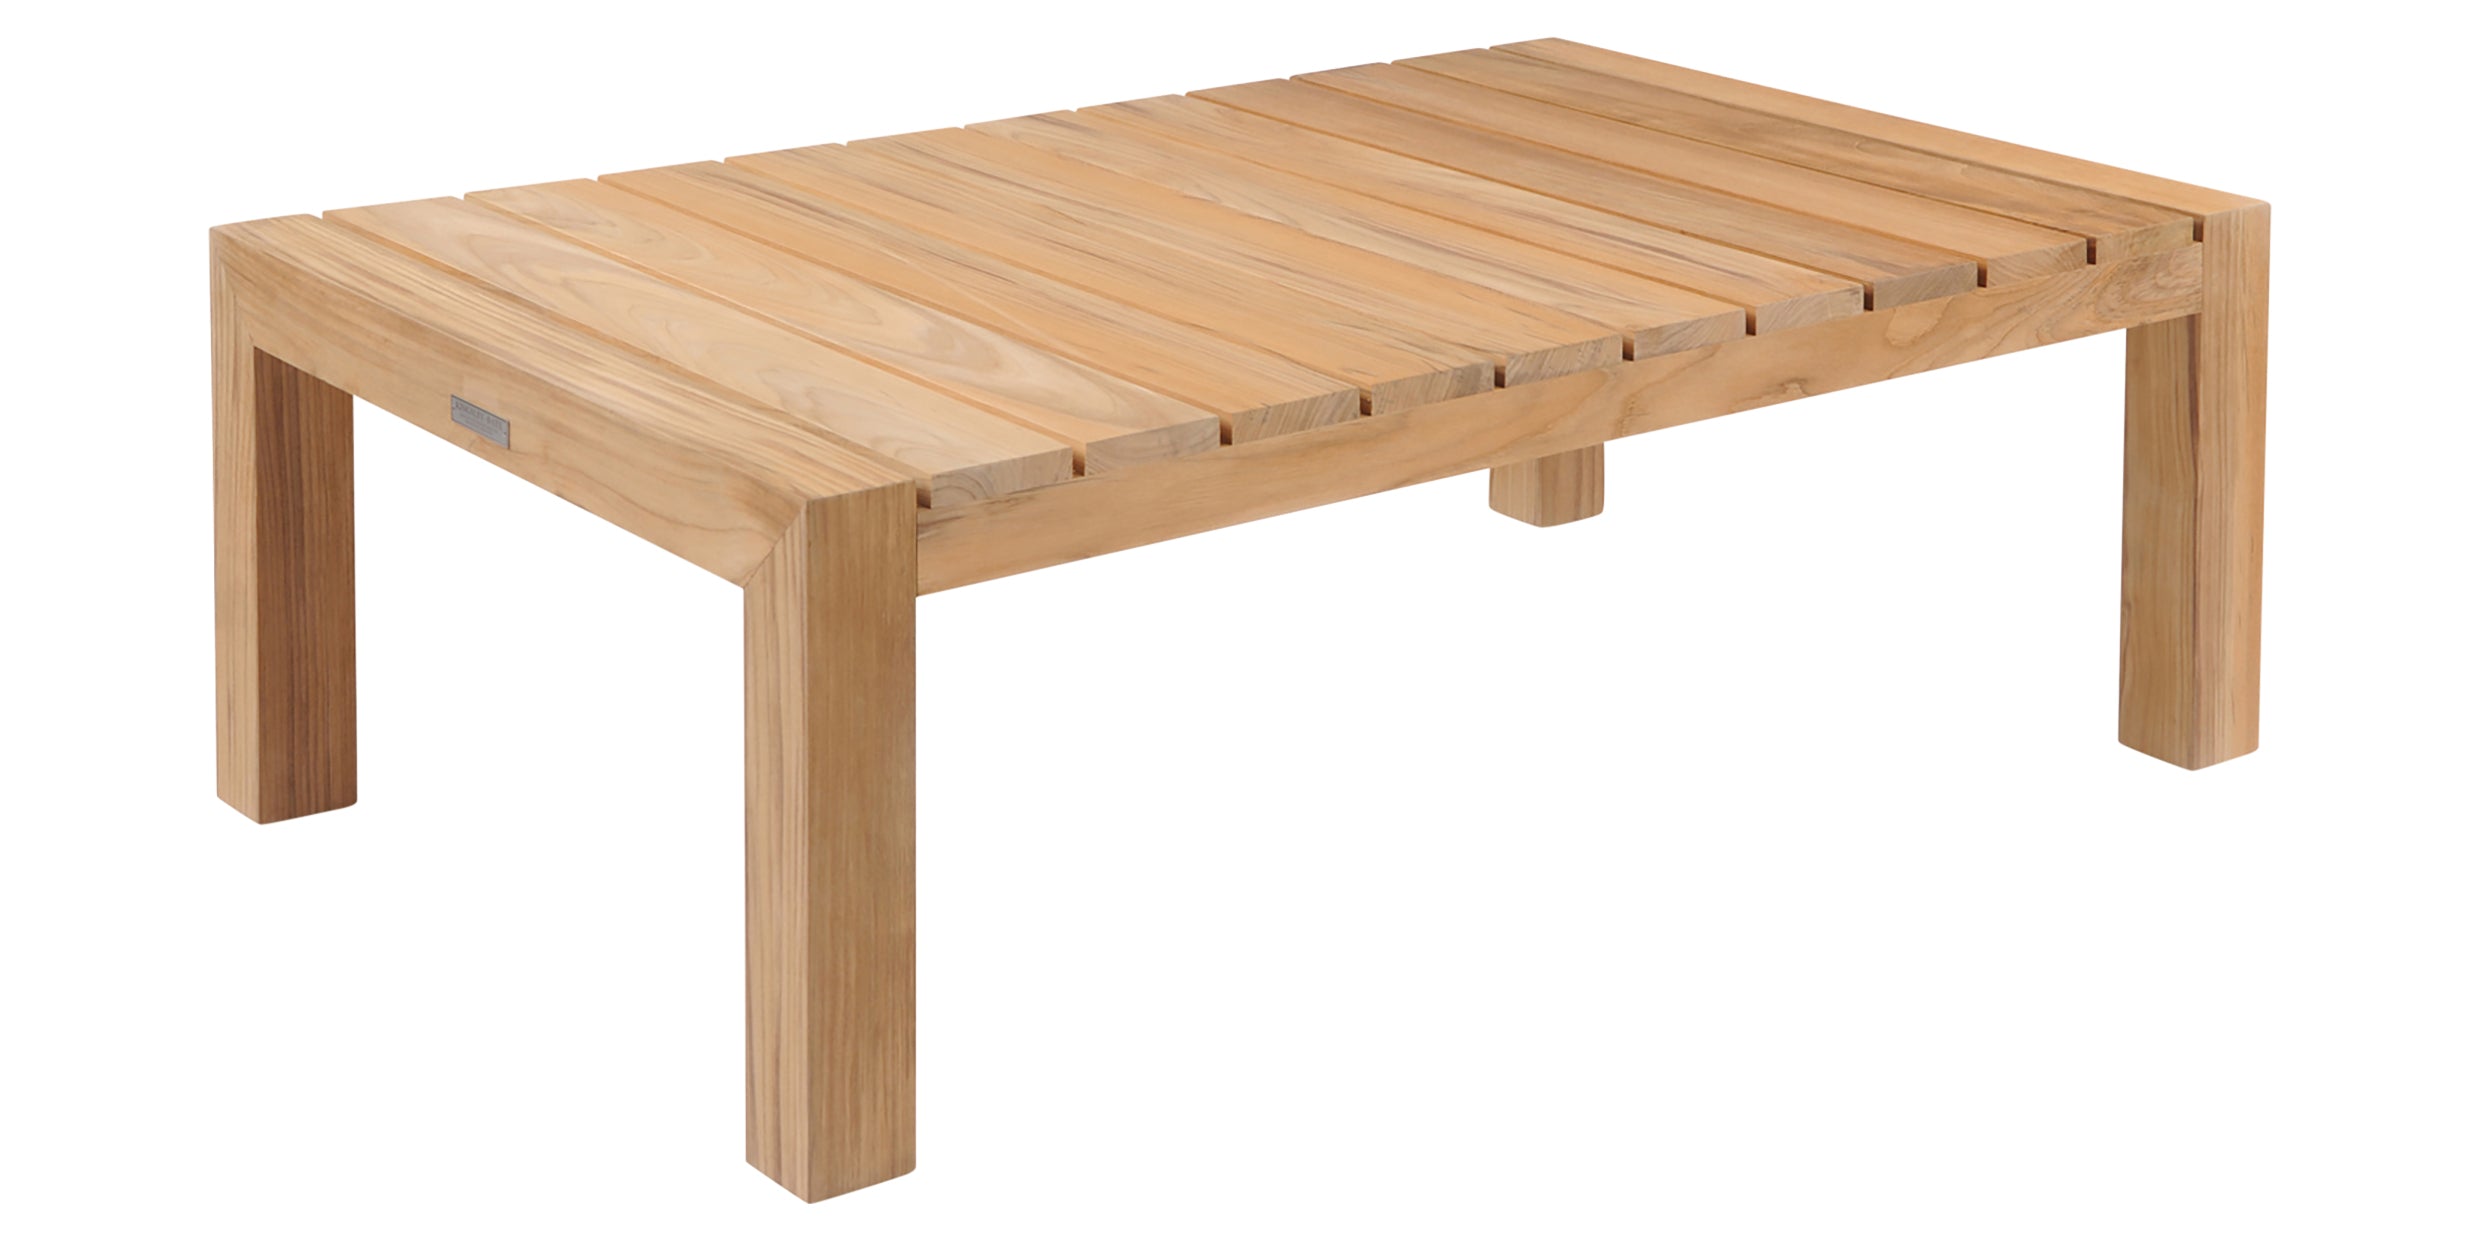 Coffee Table | Kingsley Bate Mendocino Collection | Valley Ridge Furniture